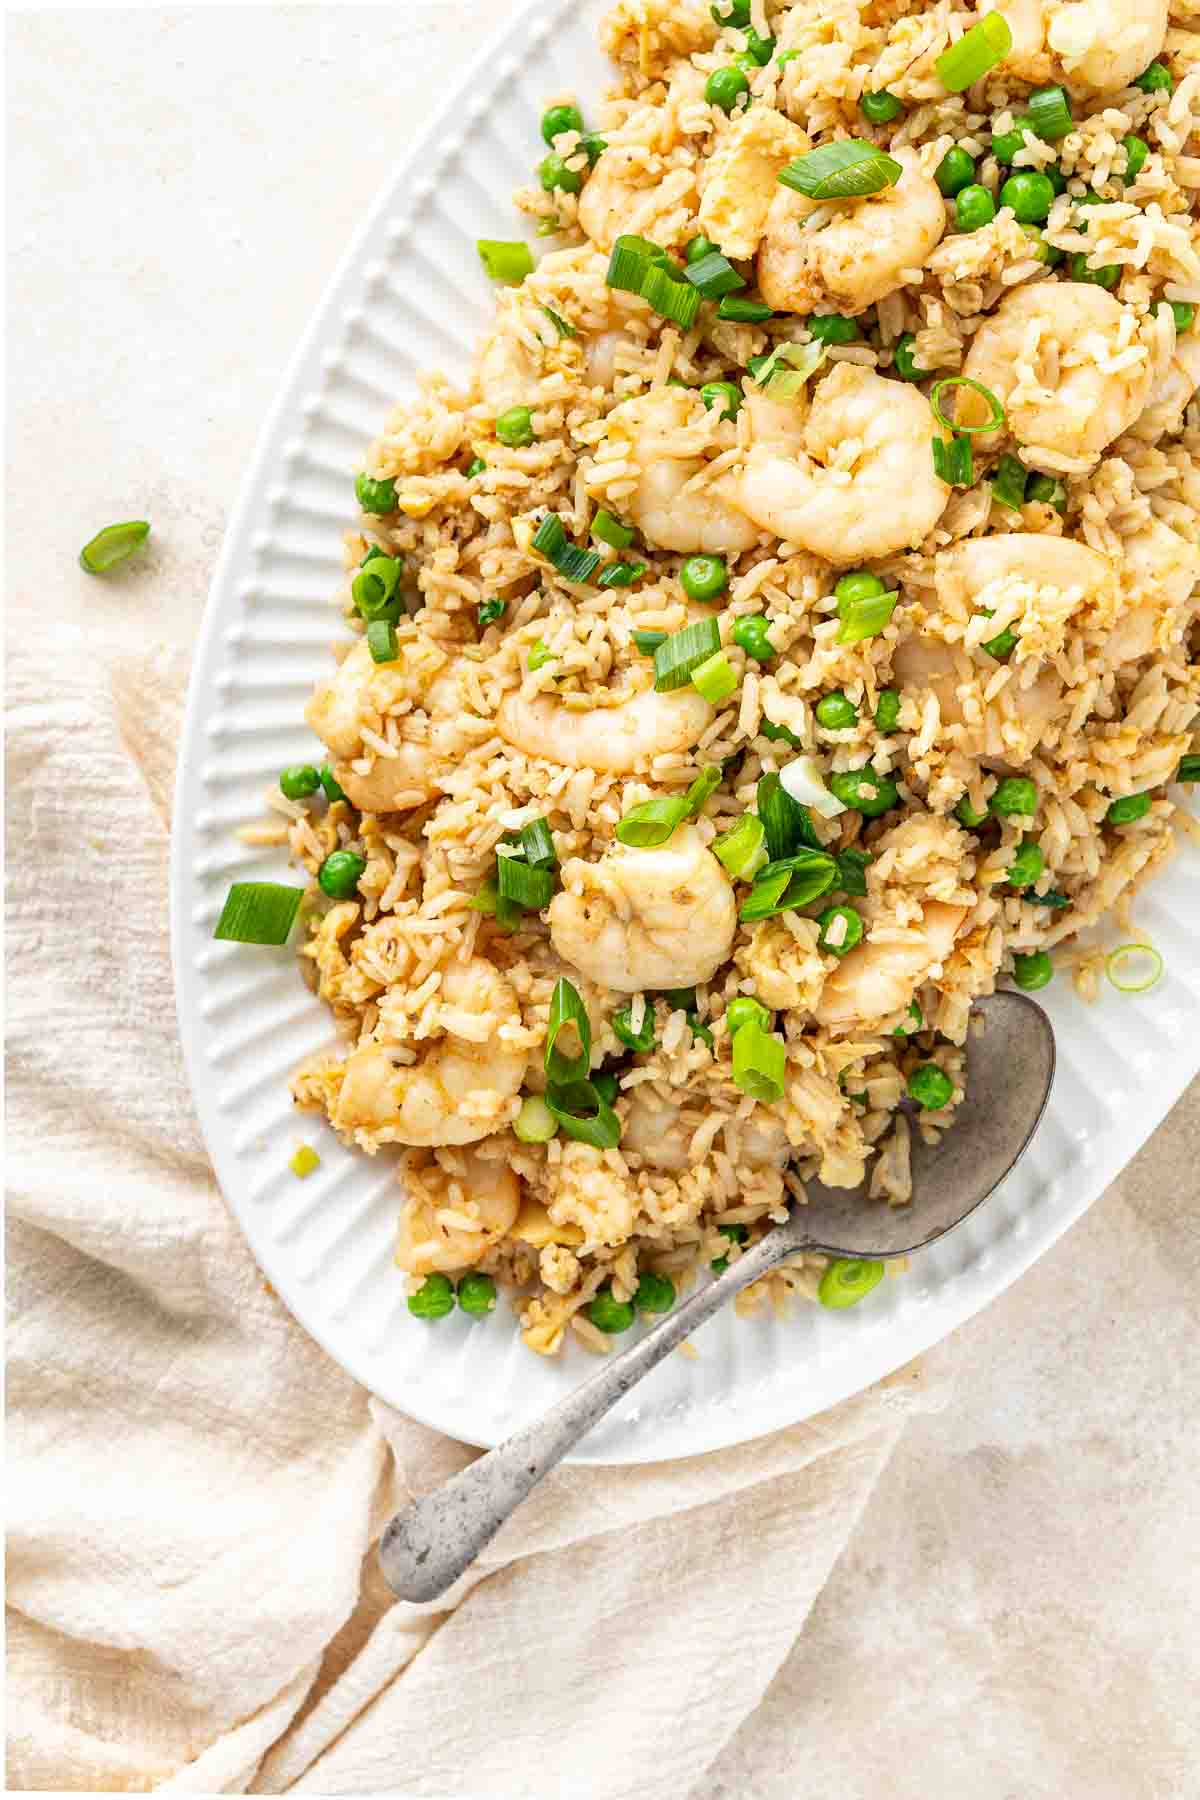 Prawn fried rice served onto a large plate with a spoon.